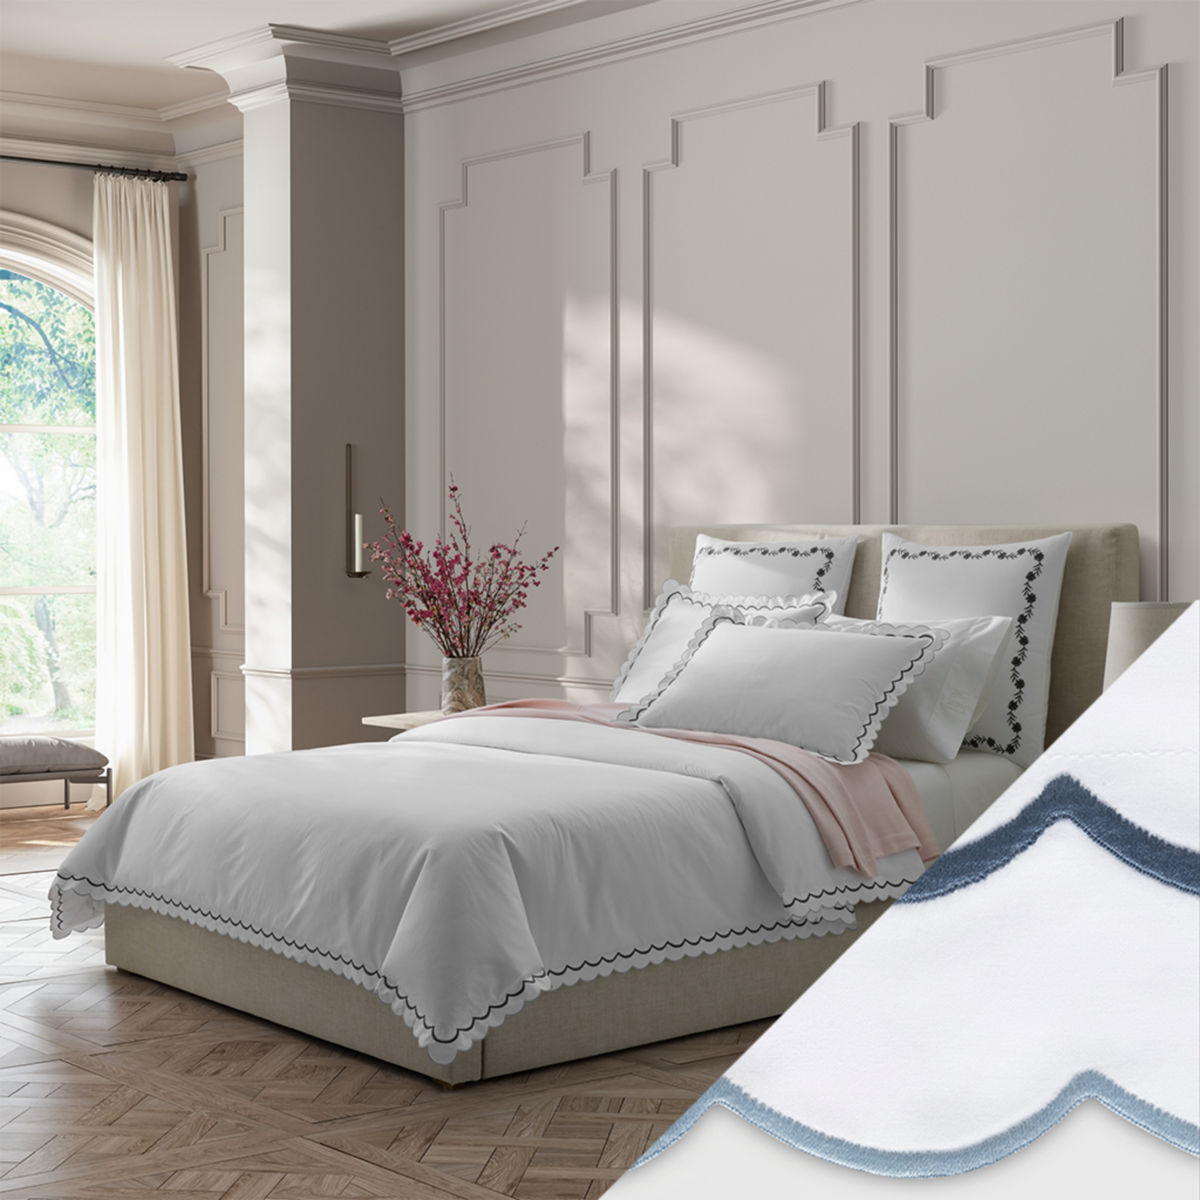 Full Bed Dressed in Matouk India Bedding in Charcoal Color with Hazy Blue Swatch